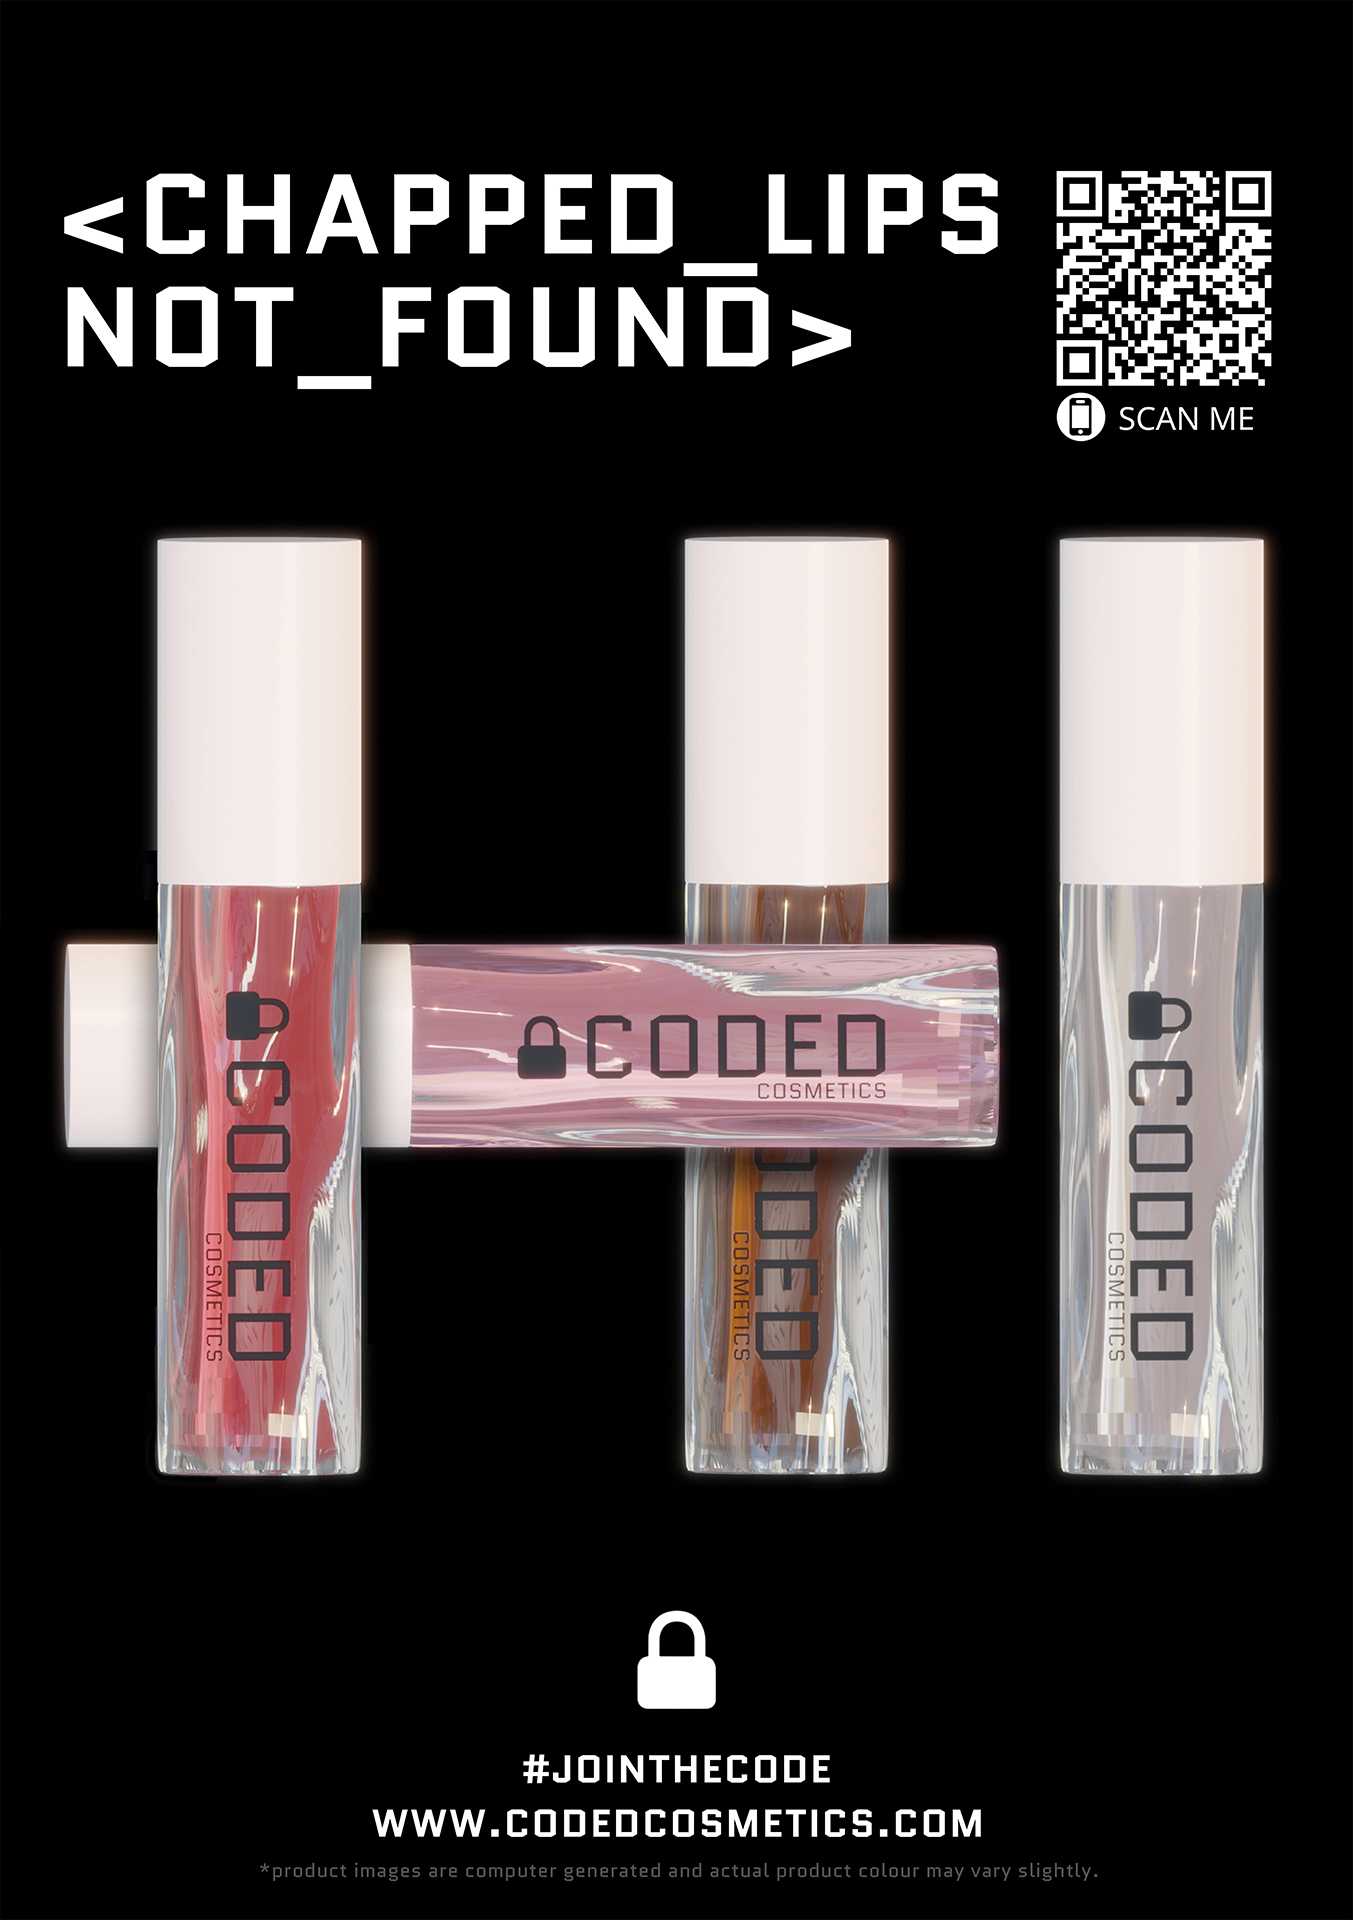 Coded Cosmetics 'Chapped Lips Not Found' QR code promotional asset